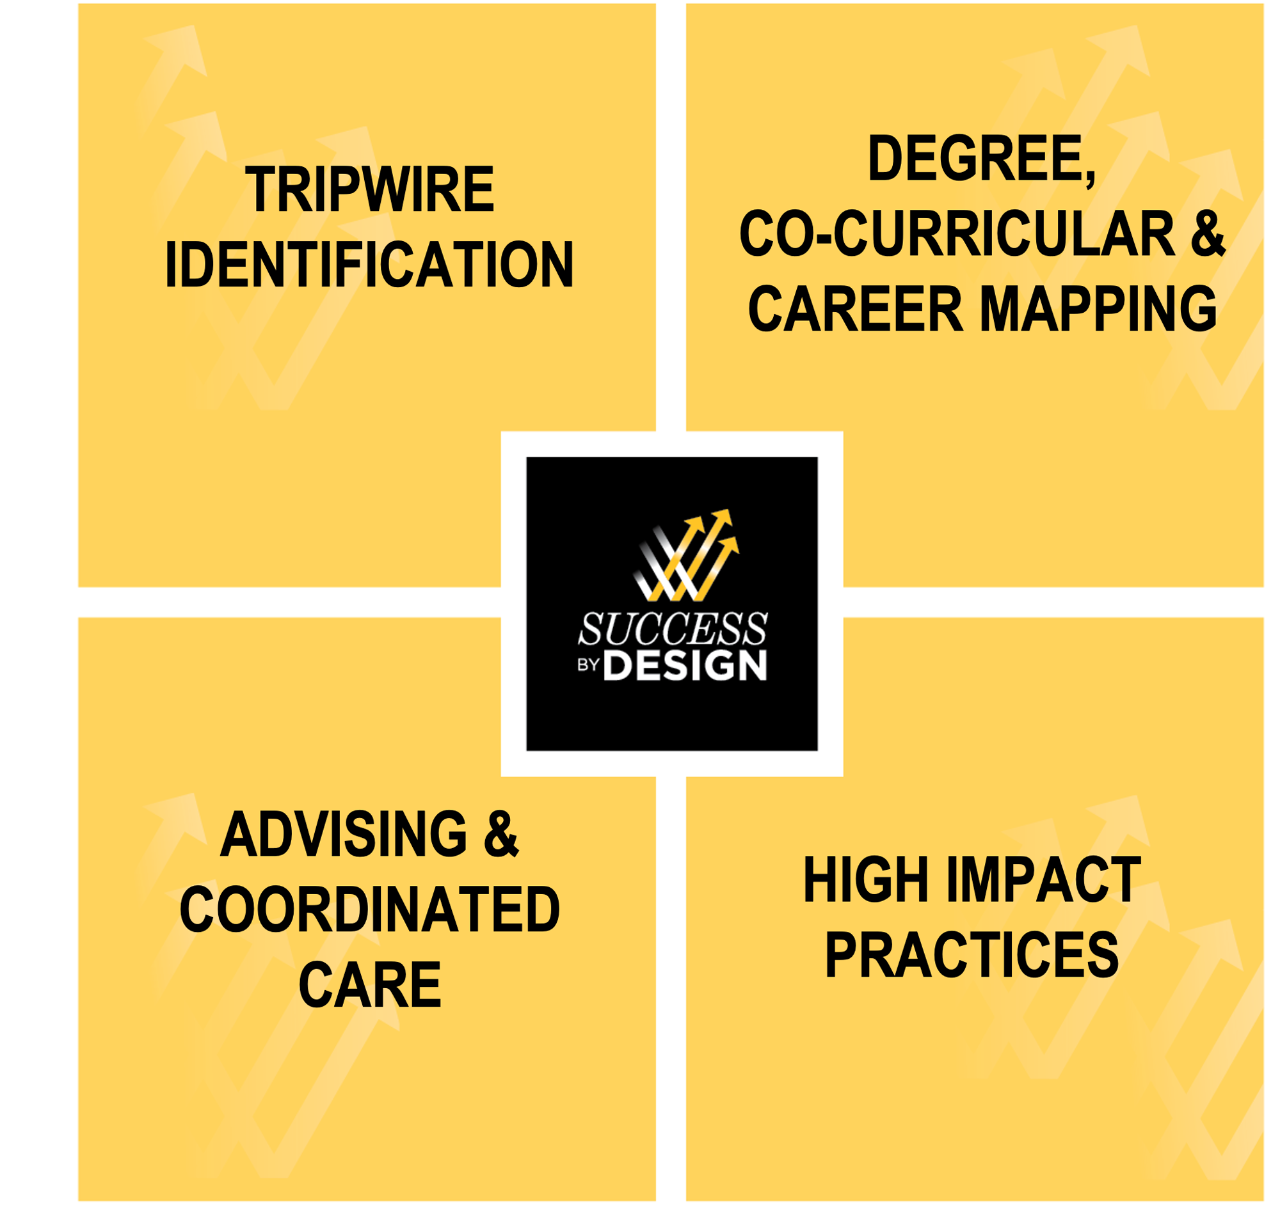 SBD four student success impact projects: Tripwire Identification; Degree, Co-Curricular & Career Mapping; Advising & Coordinated Care; High Impact Practices